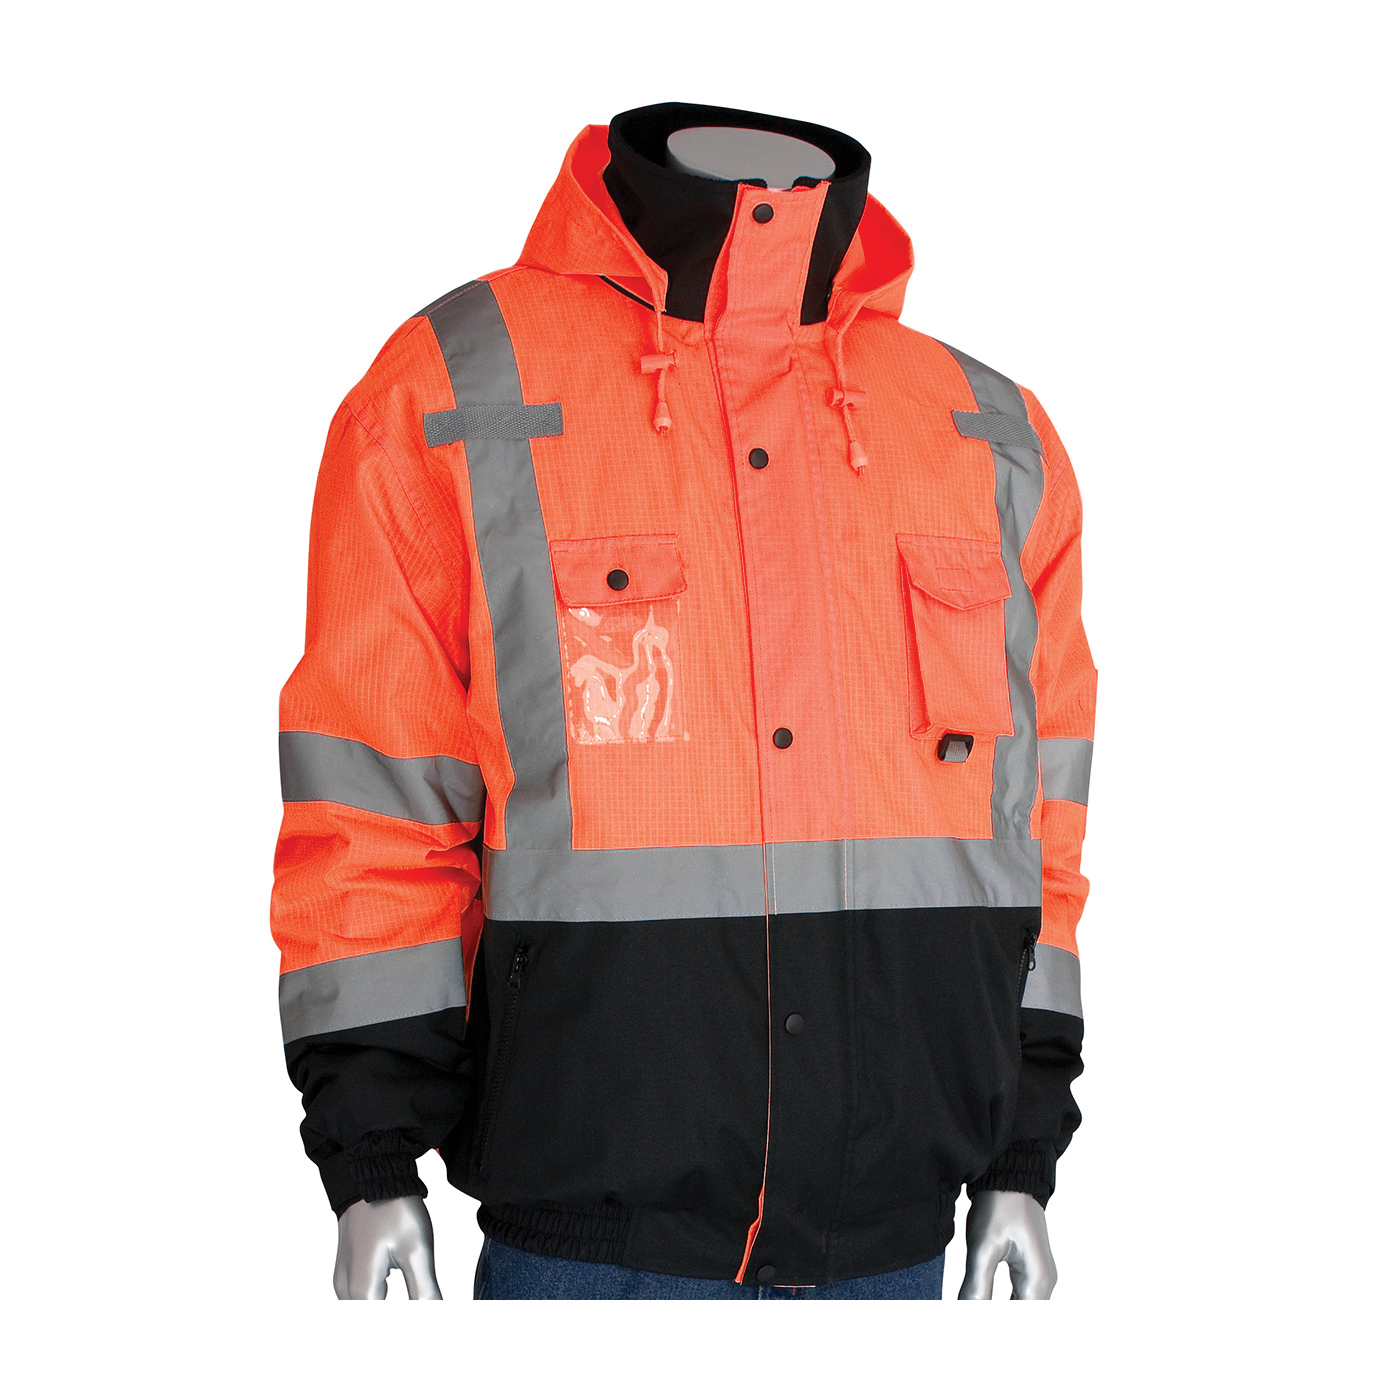 PIP® 333-1770-OR/4X Bomber Jacket With Zip-Out Fleece Liner, Hi-Viz Orange, Polyester, 70 in Chest, Resists: Water, Specifications Met: ANSI 107 Class 3 Type R